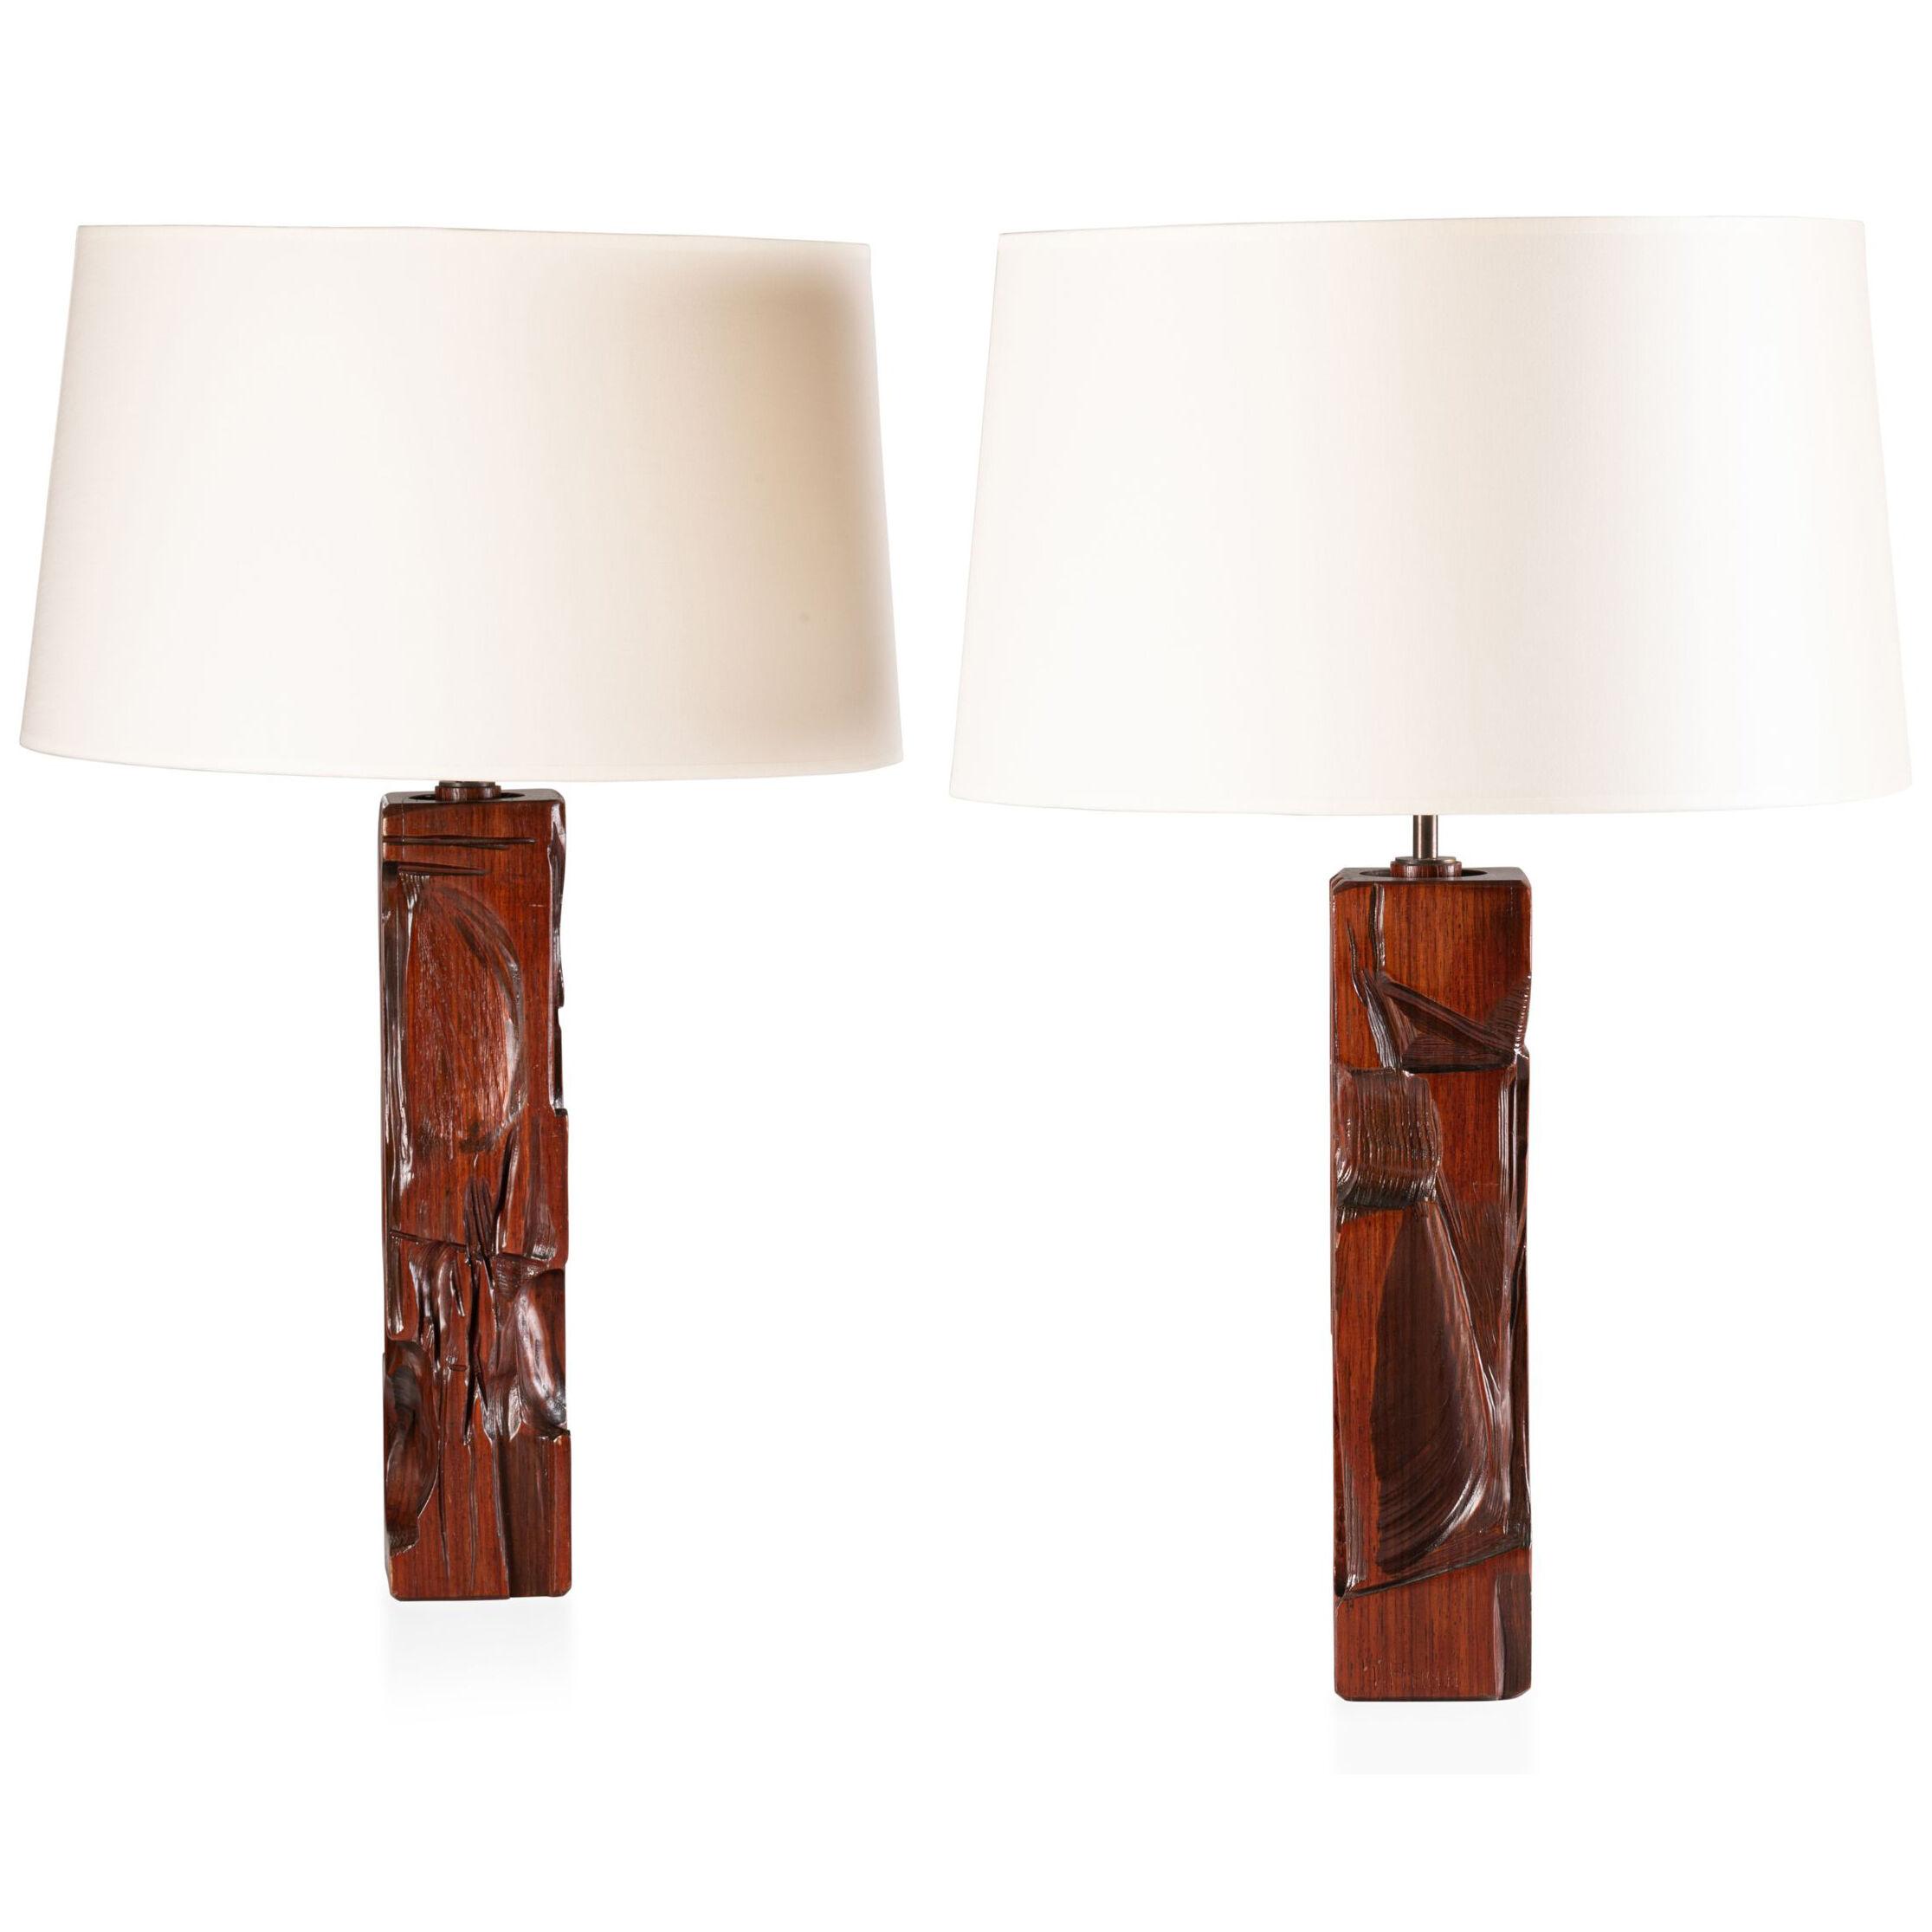 Pair of  carved wood table lamps by Gianni Pinna